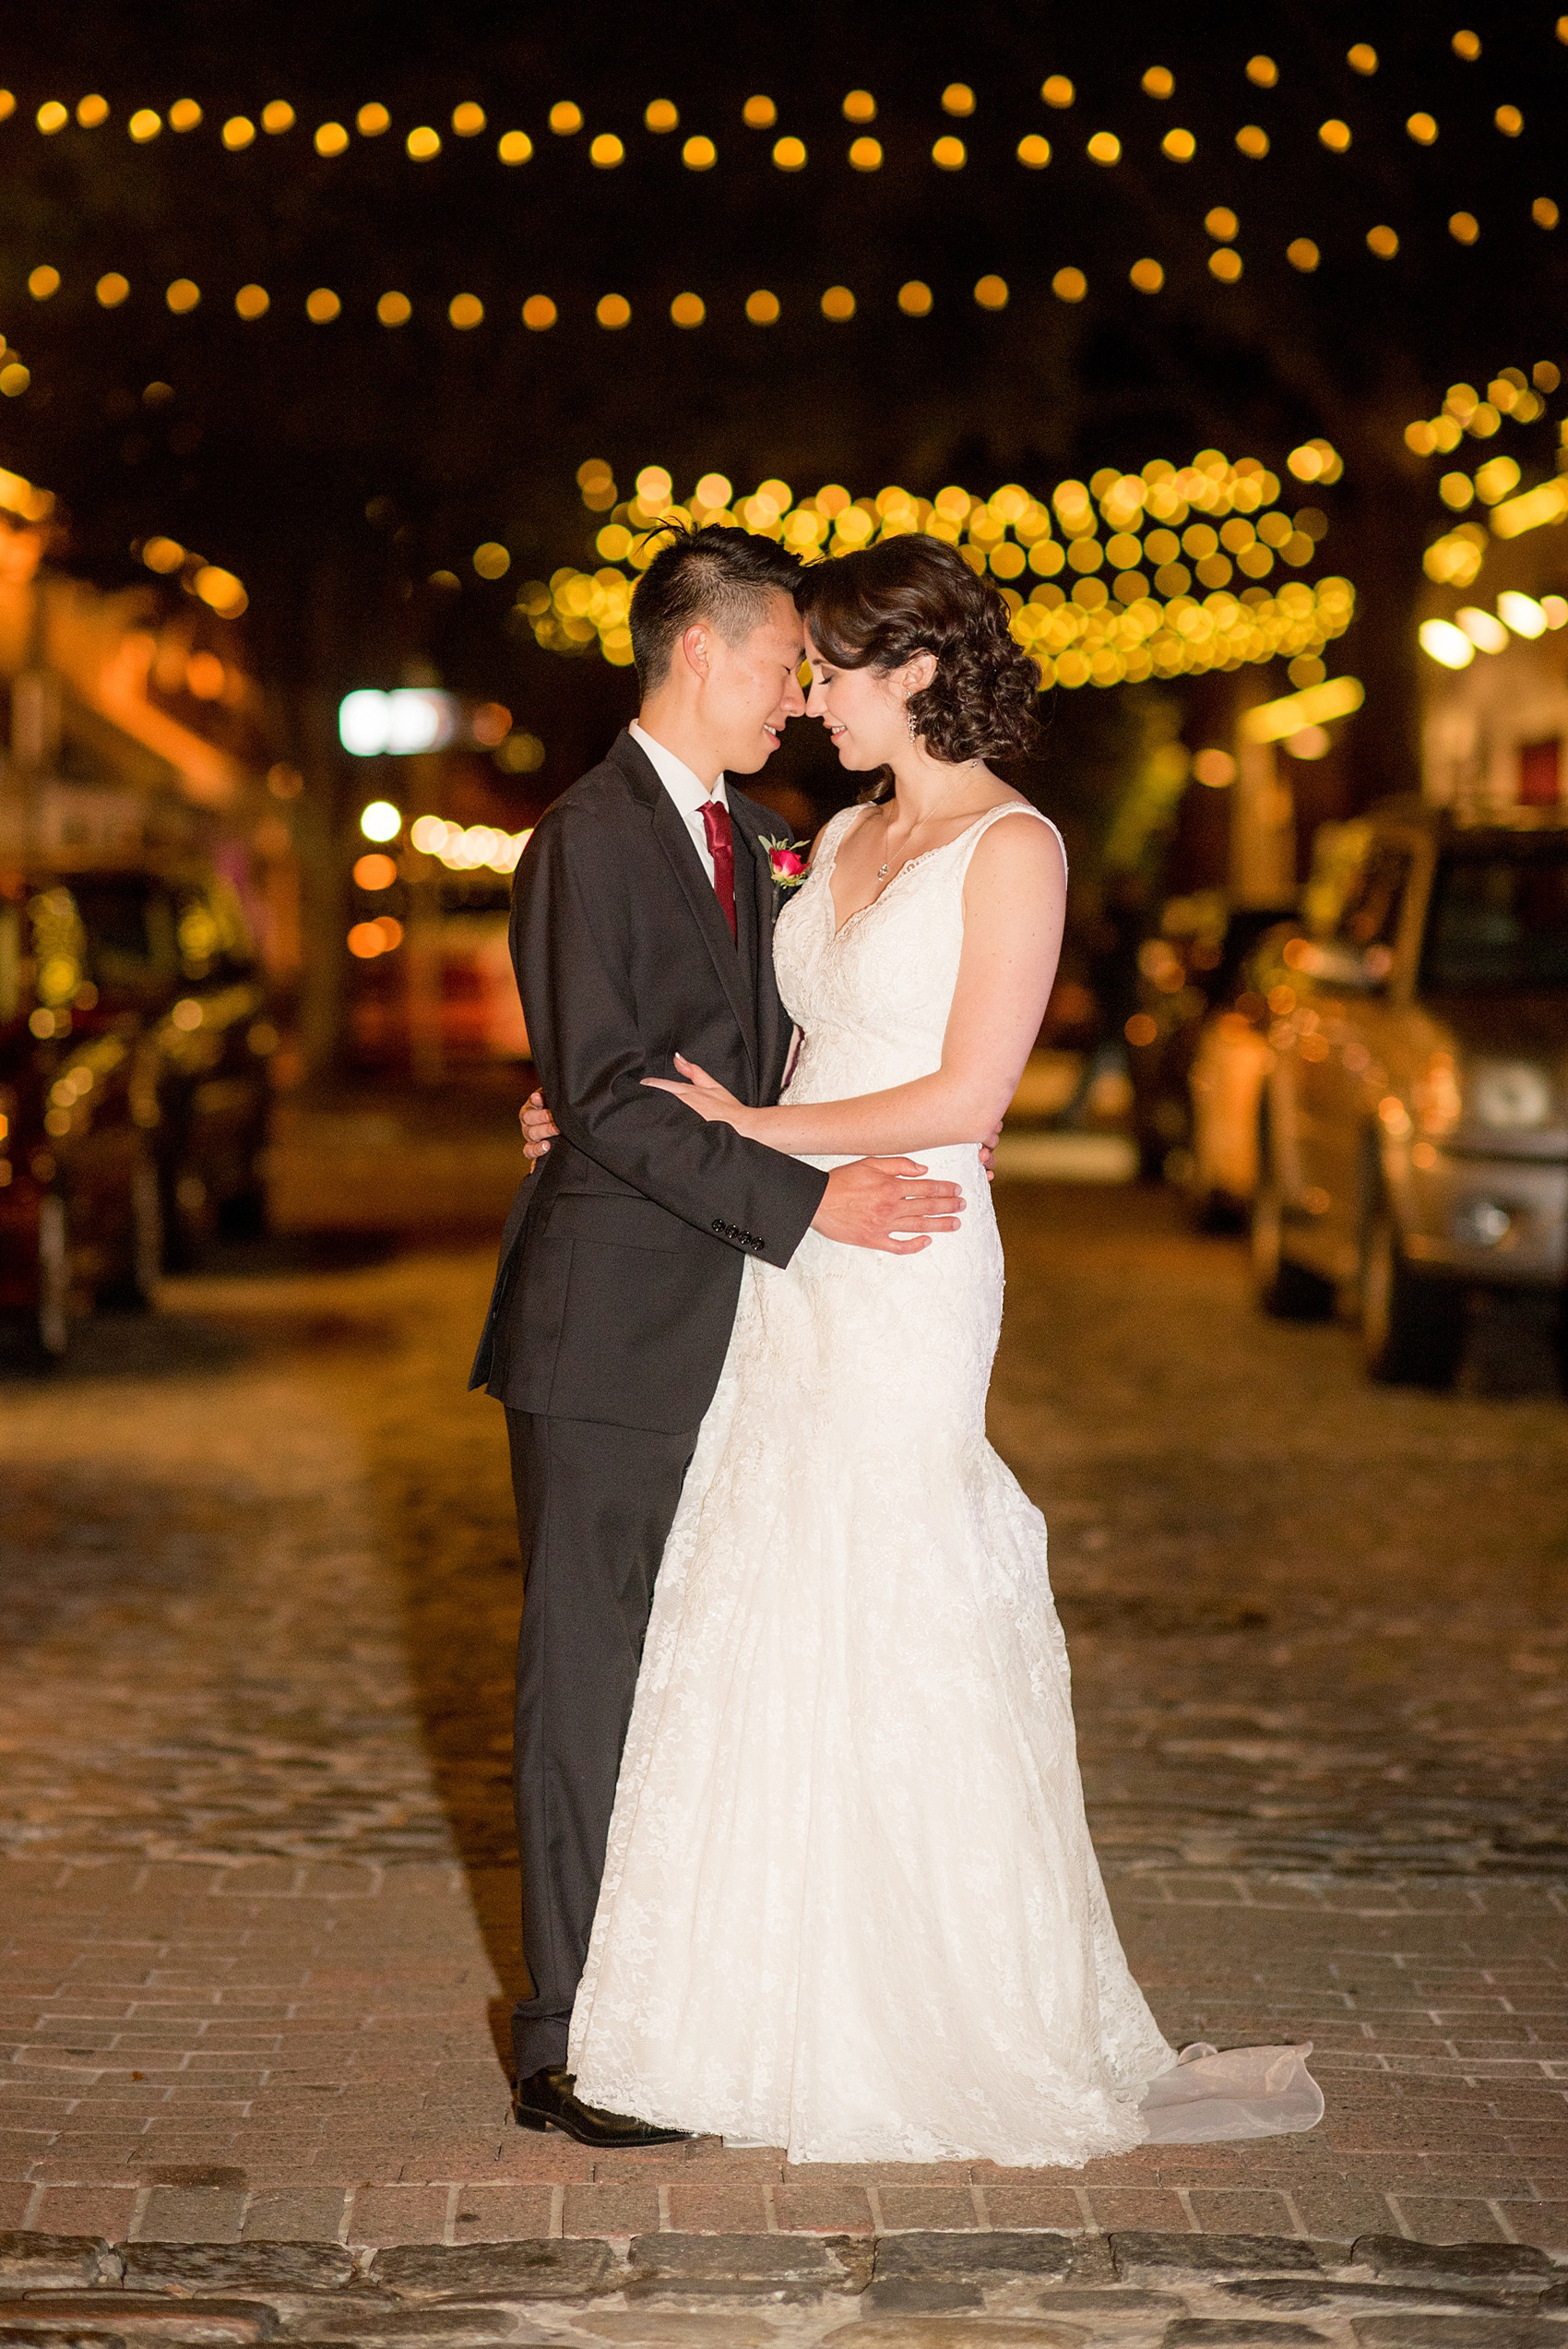 Mikkel Paige Photography photos from a wedding at 214 Martin Street in downtown Raleigh. Picture of the bride and groom at night with market bistro lights.